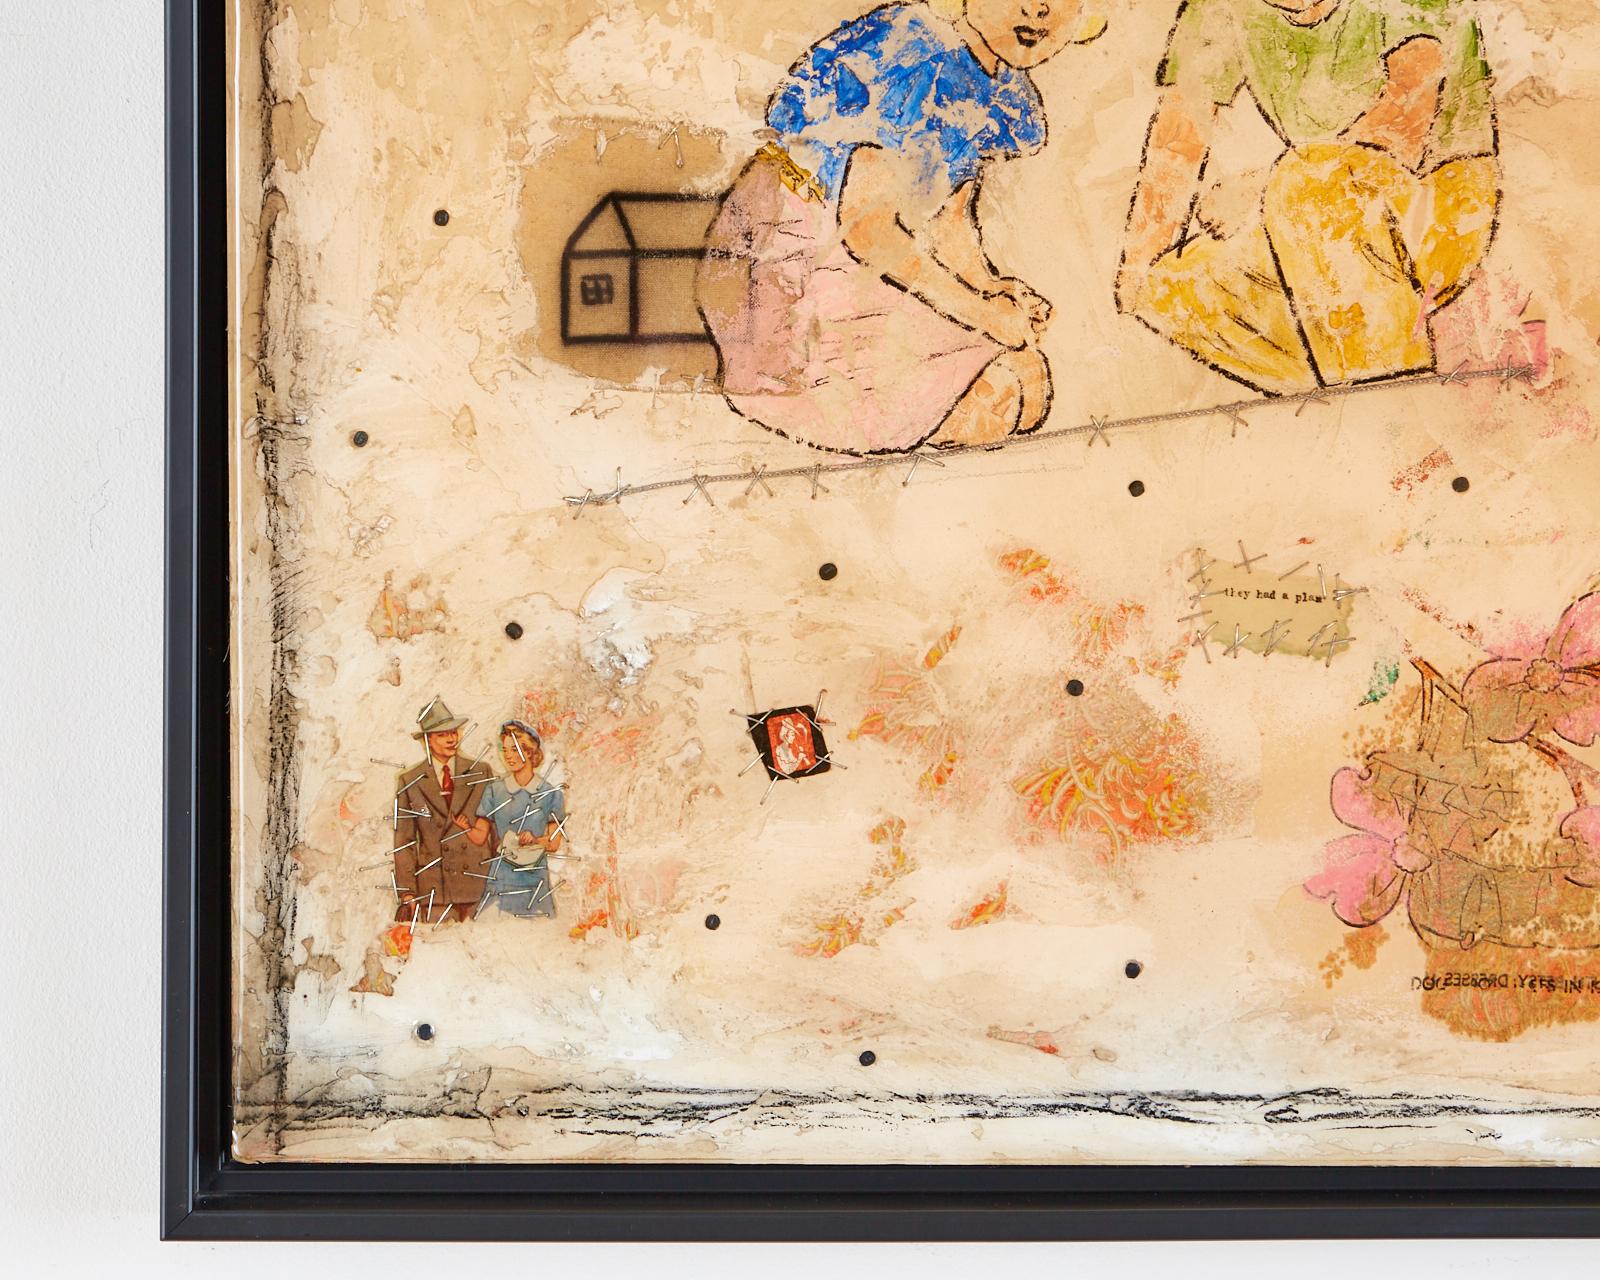 Fascinating mixed media collage on panel by James Henderson (American 20th century). The painting has images and textures on a panel that has been encased in resin giving it a molten glass effect. Art measures 24 inches by 24 inches and is set in a